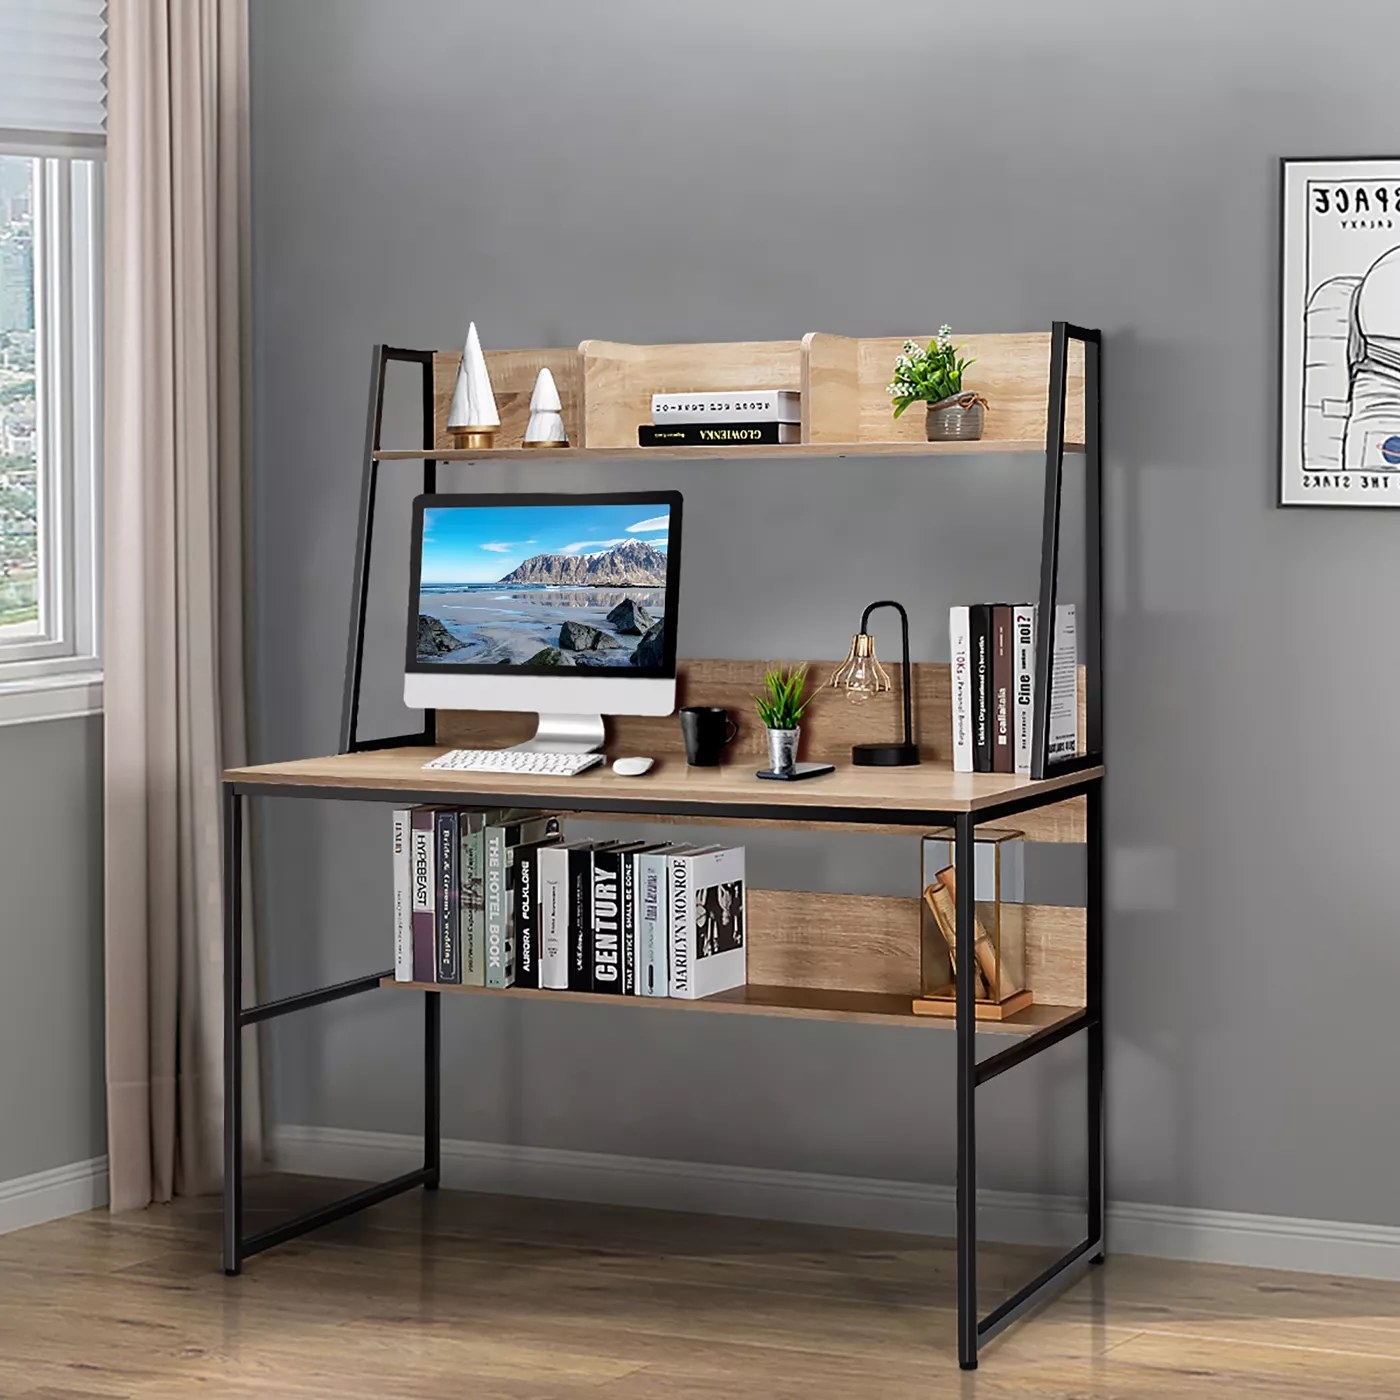 The natural wood and metal frame desk